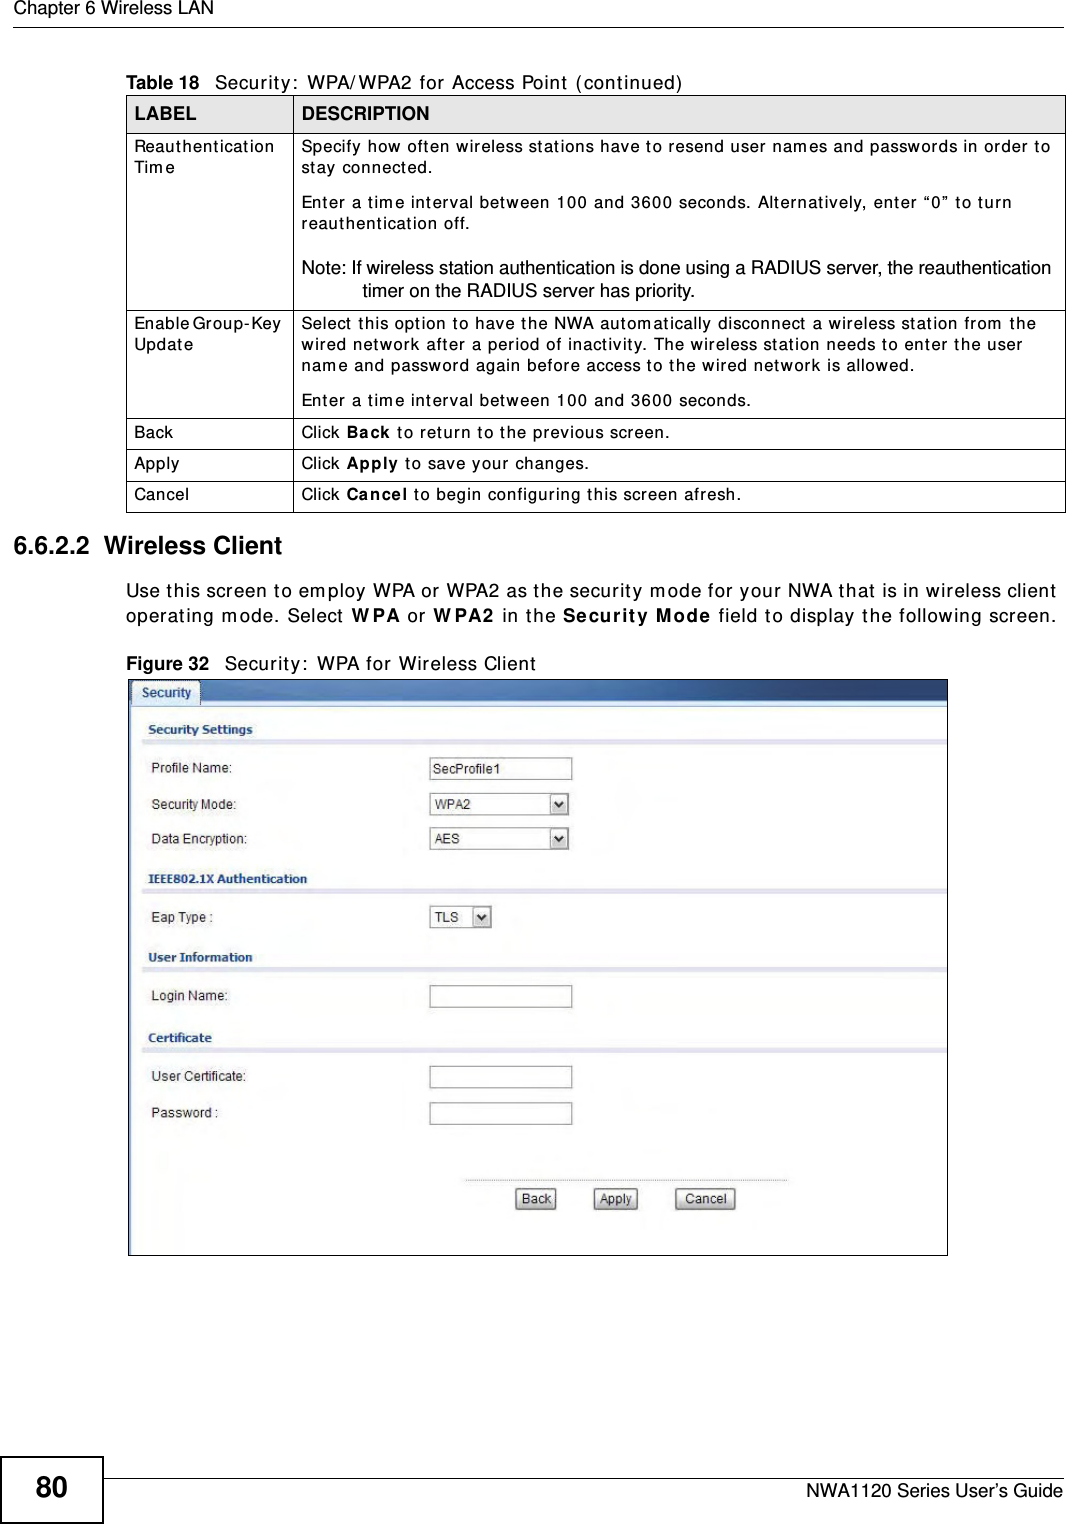 Chapter 6 Wireless LANNWA1120 Series User’s Guide806.6.2.2  Wireless ClientUse this screen to employ WPA or WPA2 as the security mode for your NWA that is in wireless client operating mode. Select WPA or WPA2 in the Security Mode field to display the following screen.Figure 32   Security: WPA for Wireless ClientReauthentication Time  Specify how often wireless stations have to resend user names and passwords in order to stay connected. Enter a time interval between 100 and 3600 seconds. Alternatively, enter “0” to turn reauthentication off. Note: If wireless station authentication is done using a RADIUS server, the reauthentication timer on the RADIUS server has priority. Enable Group-Key Update Select this option to have the NWA automatically disconnect a wireless station from the wired network after a period of inactivity. The wireless station needs to enter the user name and password again before access to the wired network is allowed. Enter a time interval between 100 and 3600 seconds.Back Click Back to return to the previous screen.Apply Click Apply to save your changes.Cancel Click Cancel to begin configuring this screen afresh.Table 18   Security: WPA/WPA2 for Access Point (continued)LABEL DESCRIPTION